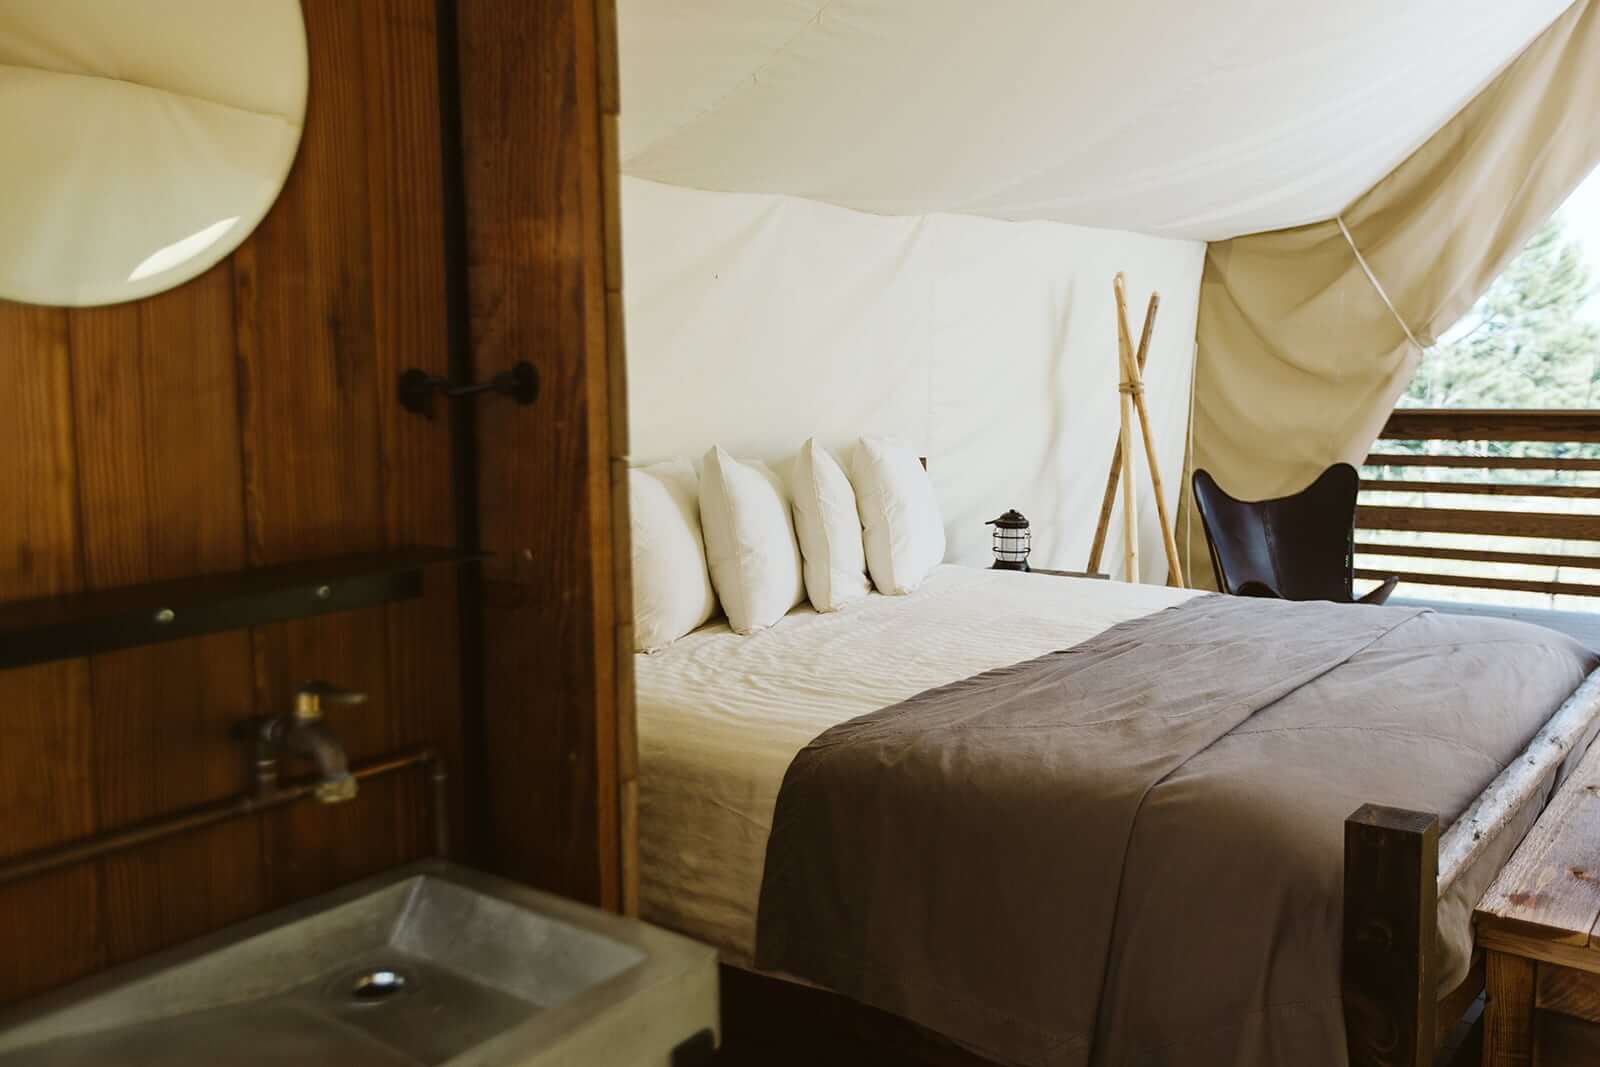 Interior of Under Canvas Glamping Tent